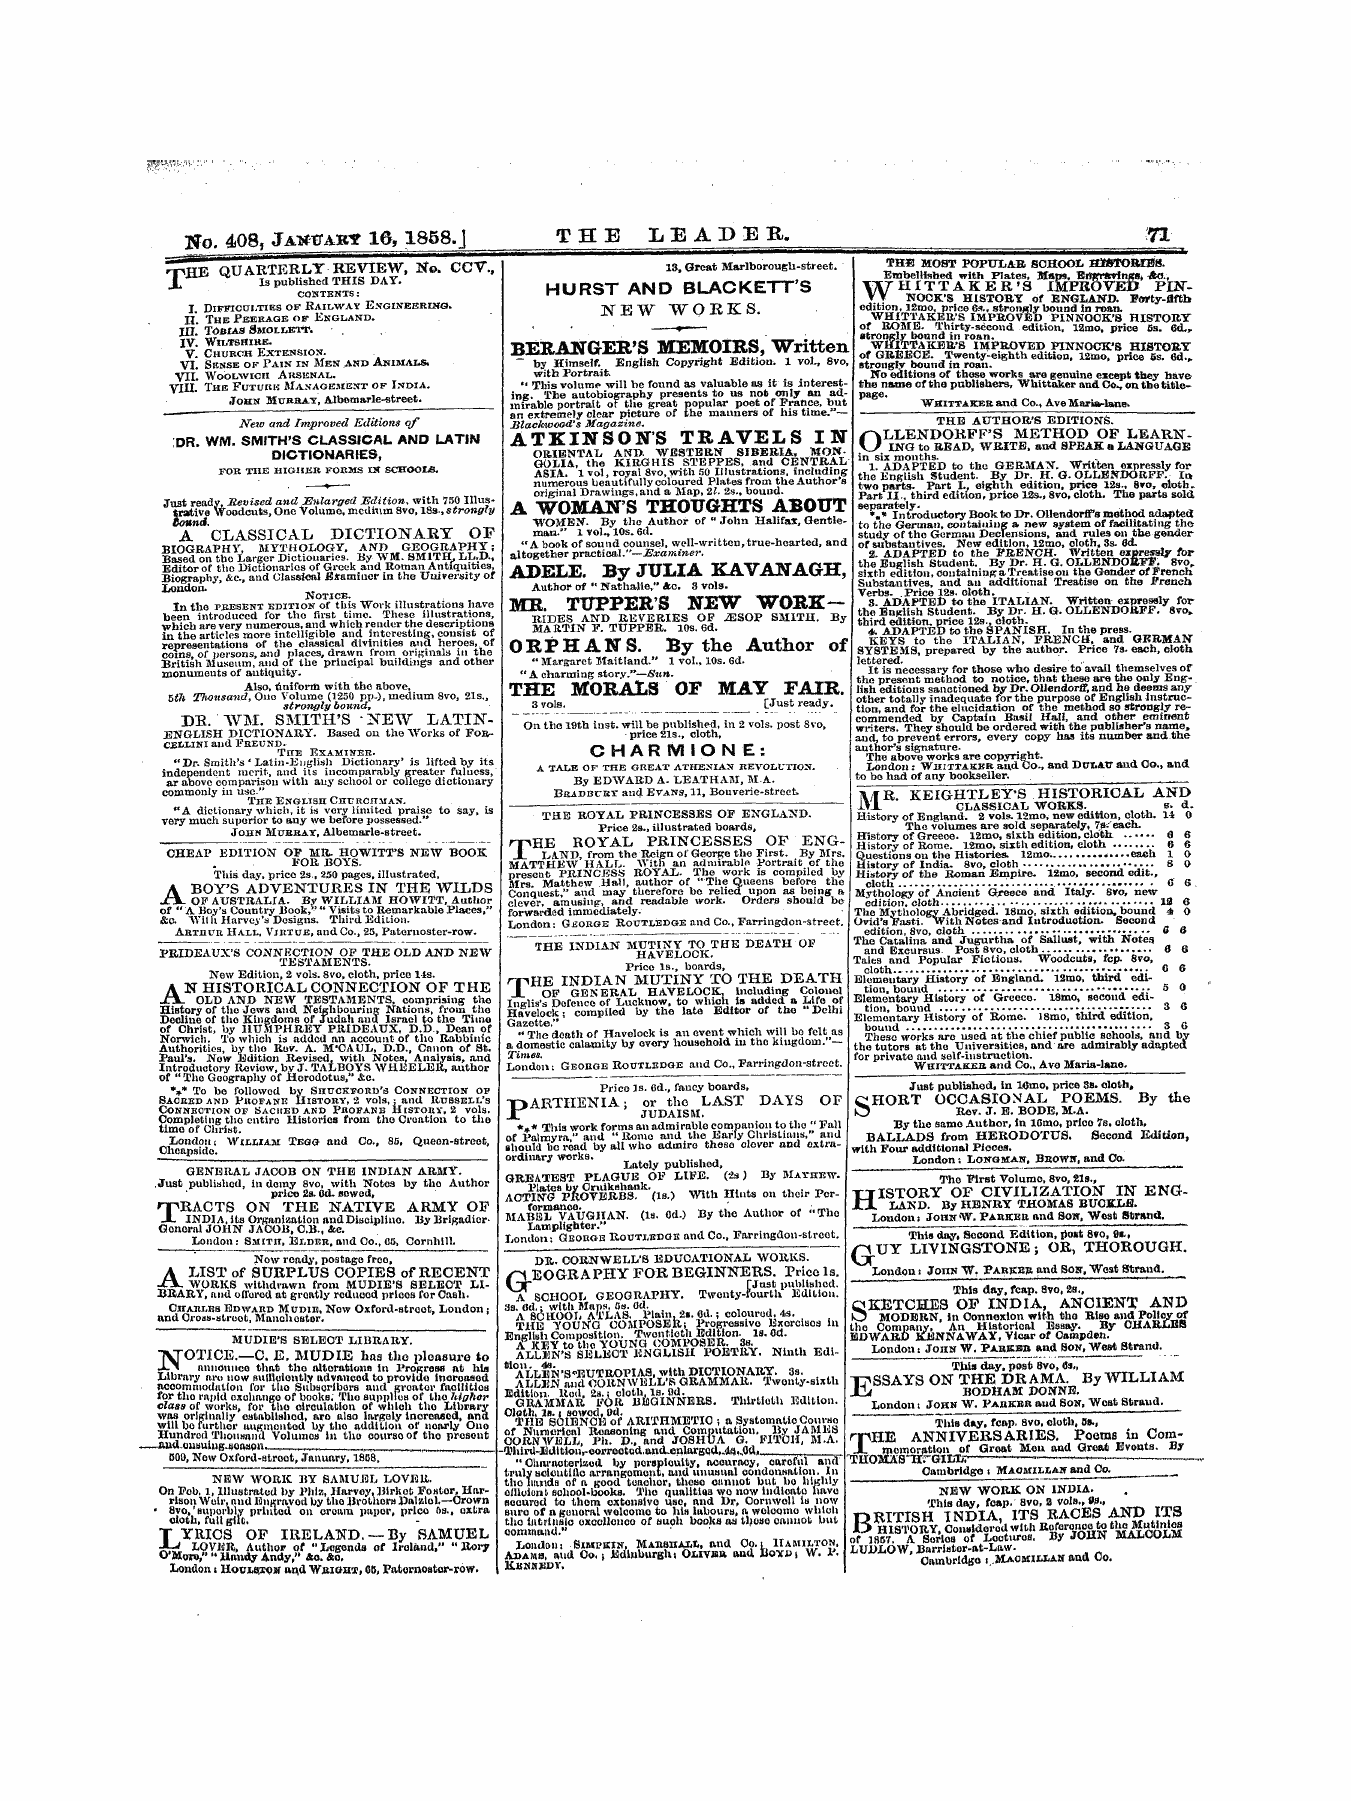 Leader (1850-1860): jS F Y, 1st edition: 23